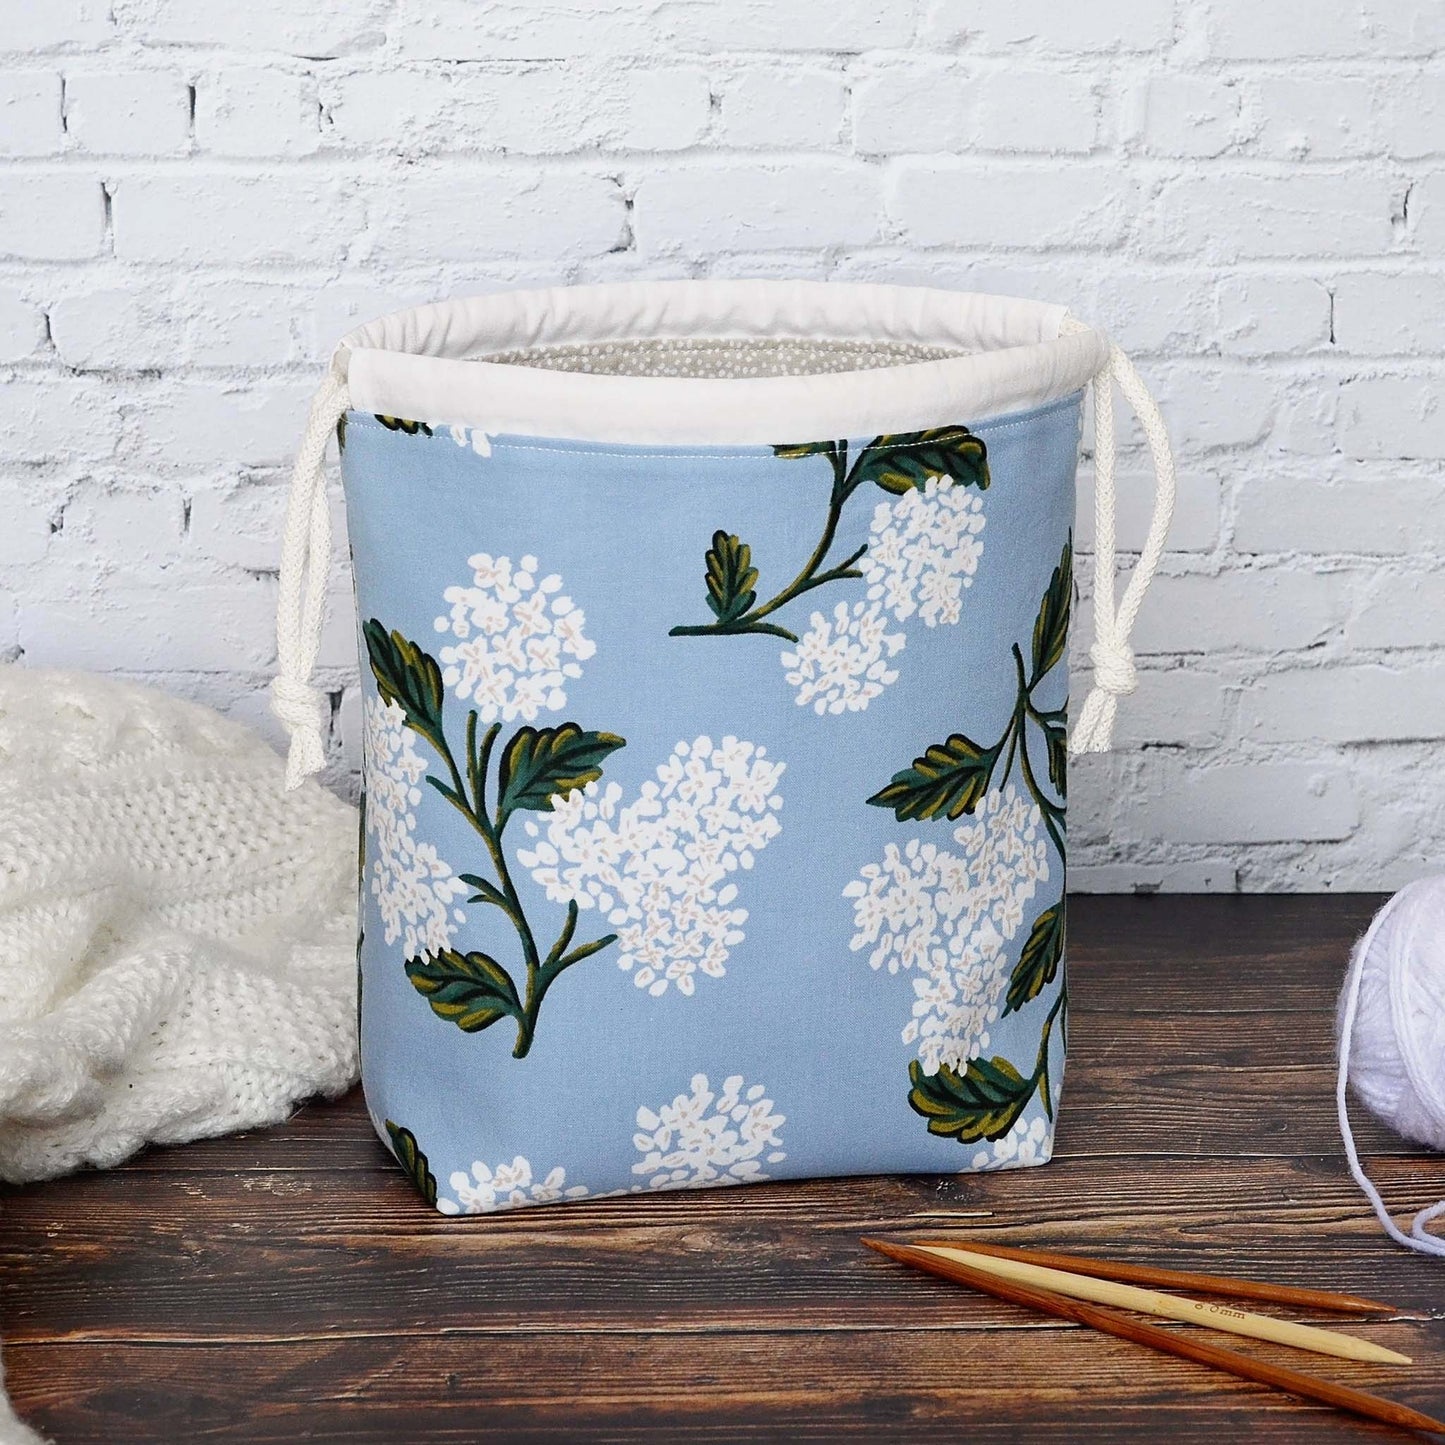 Pretty Drawstring Project Bag with Pockets in Pale Blue Hydrangeas